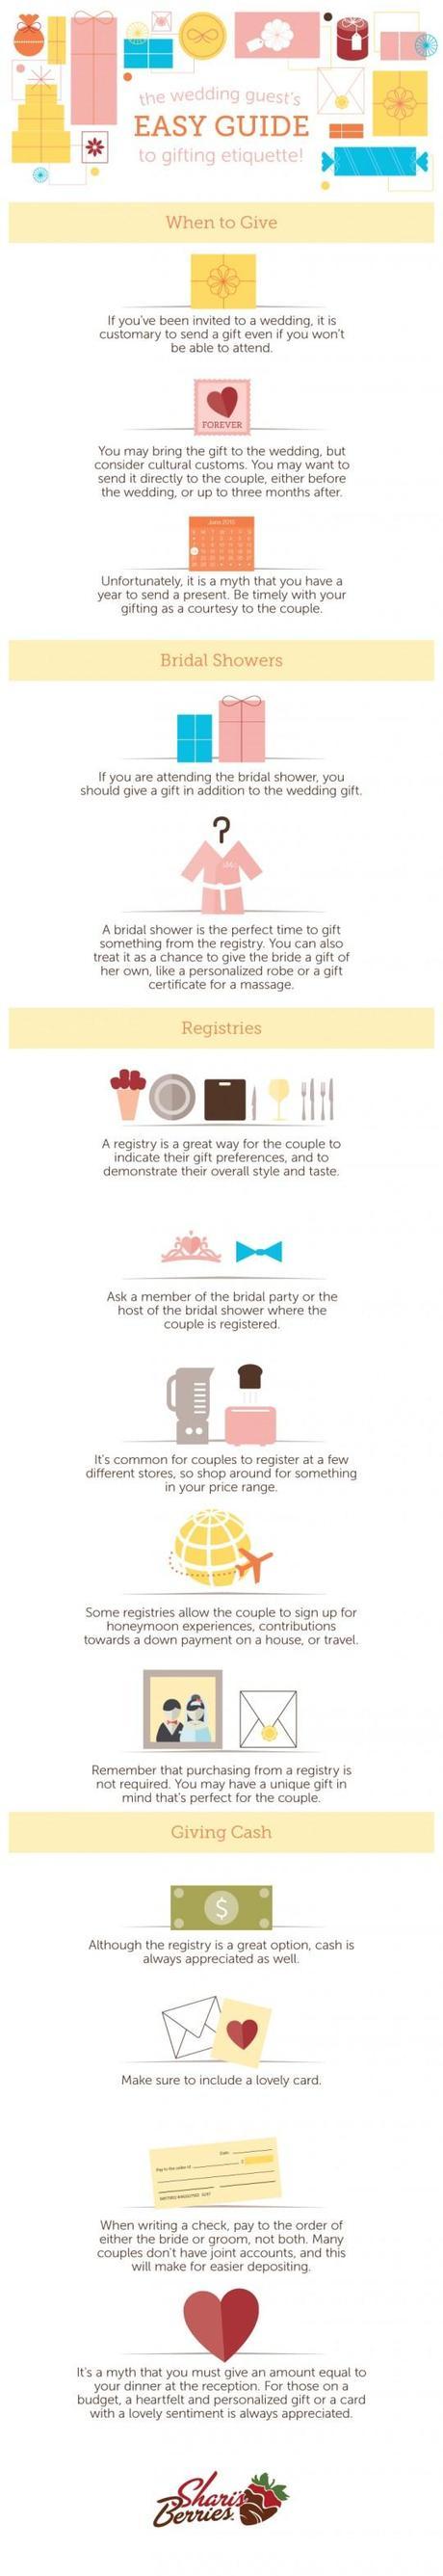 Wedding Gift Etiquette - how much to give as a wedding gift